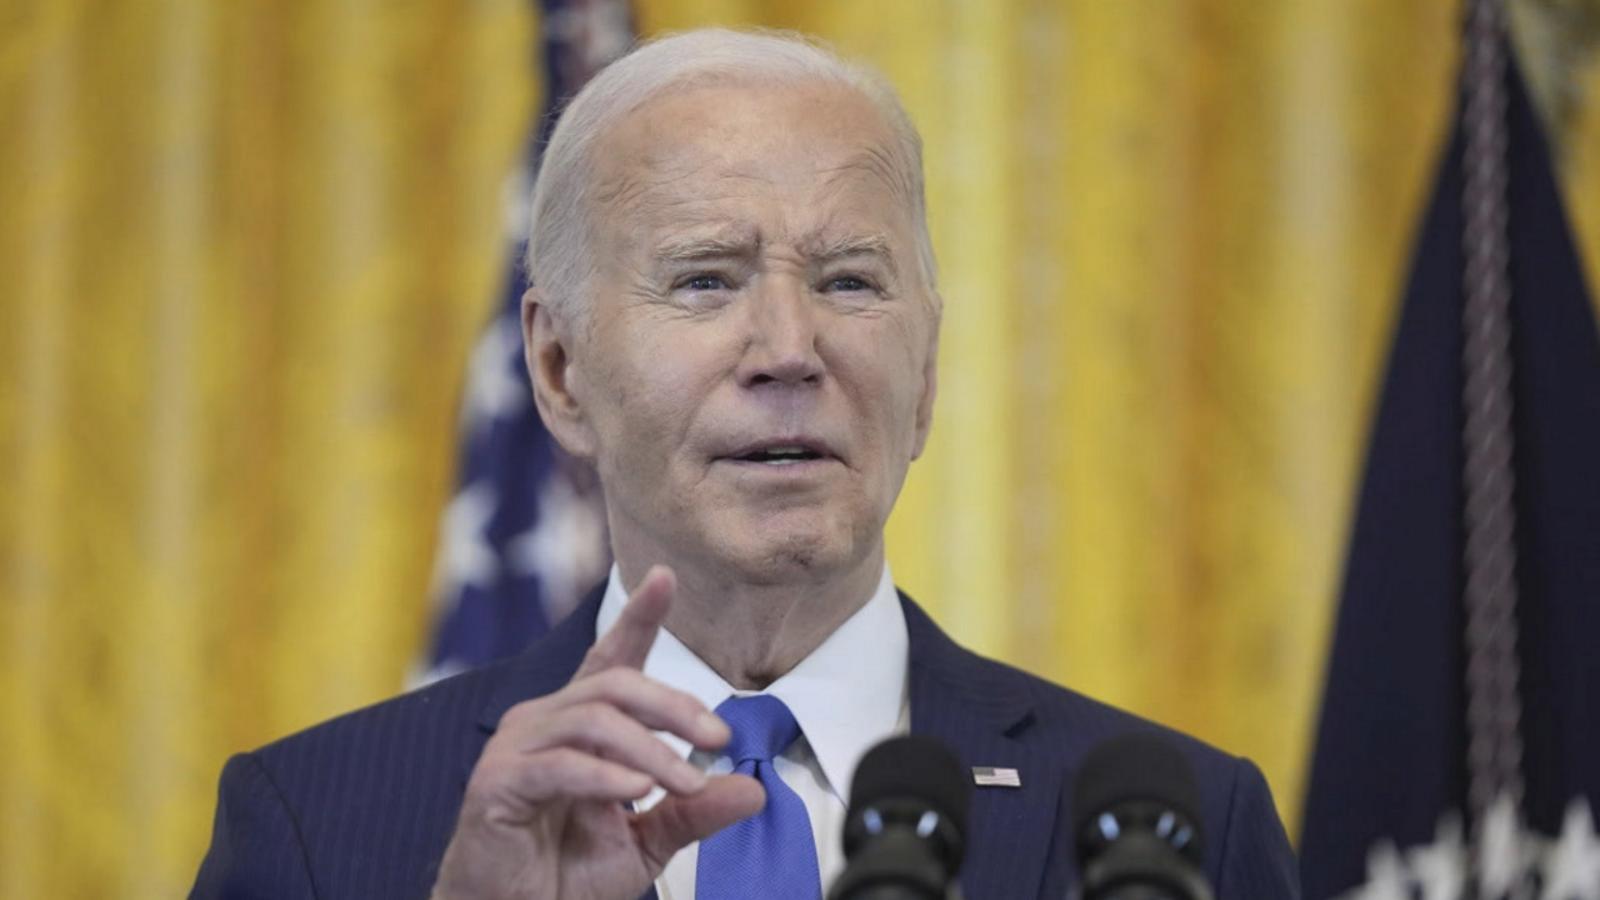 VIDEO: Democratic primary voters cast ballots to send a message to President Biden